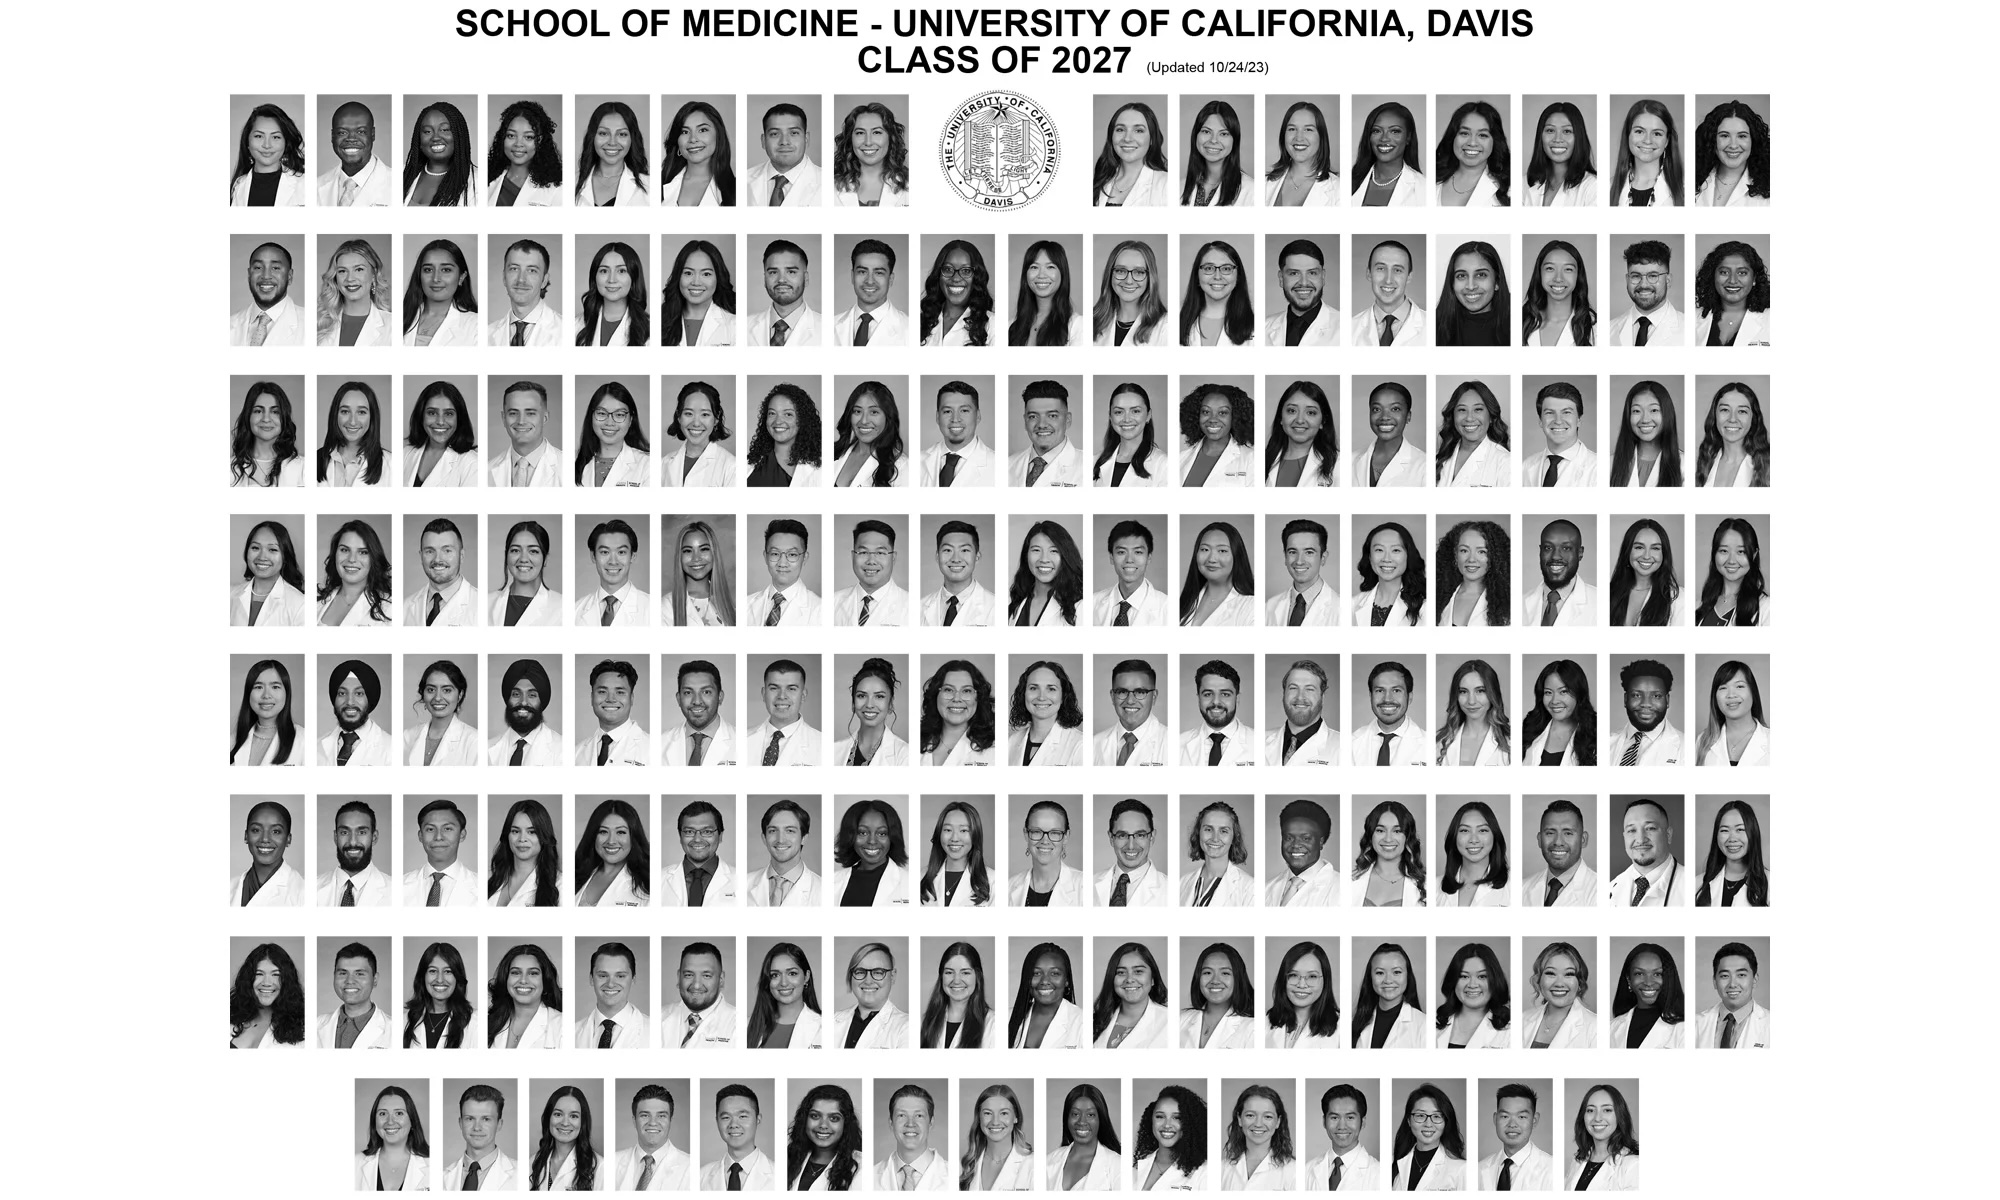 Scan of a yearbook page showing female and male students of diverse racial groups